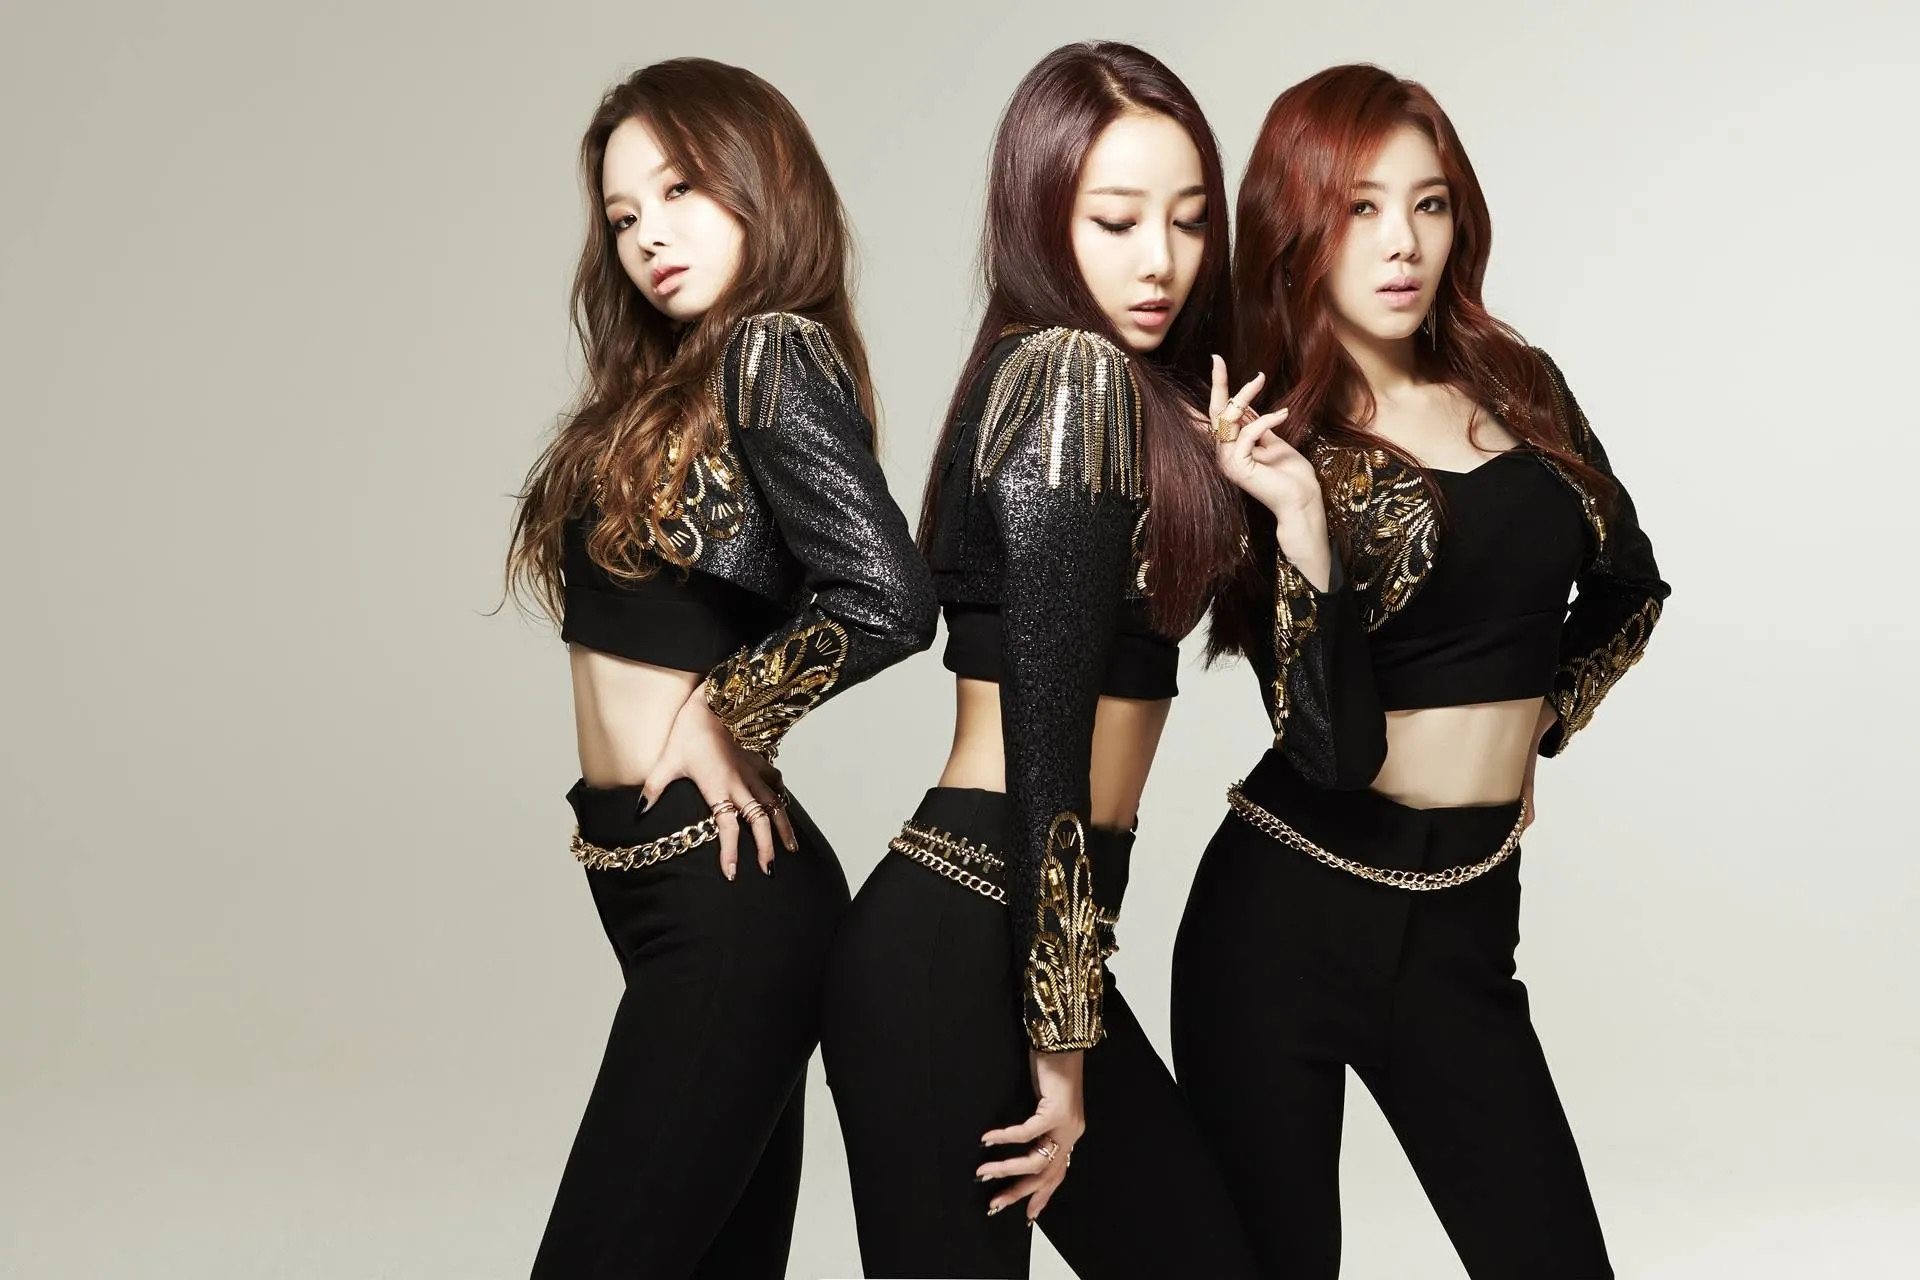 Purfles Drops Seductive Teaser Video + Images for "A Bad Thing" | Soompi